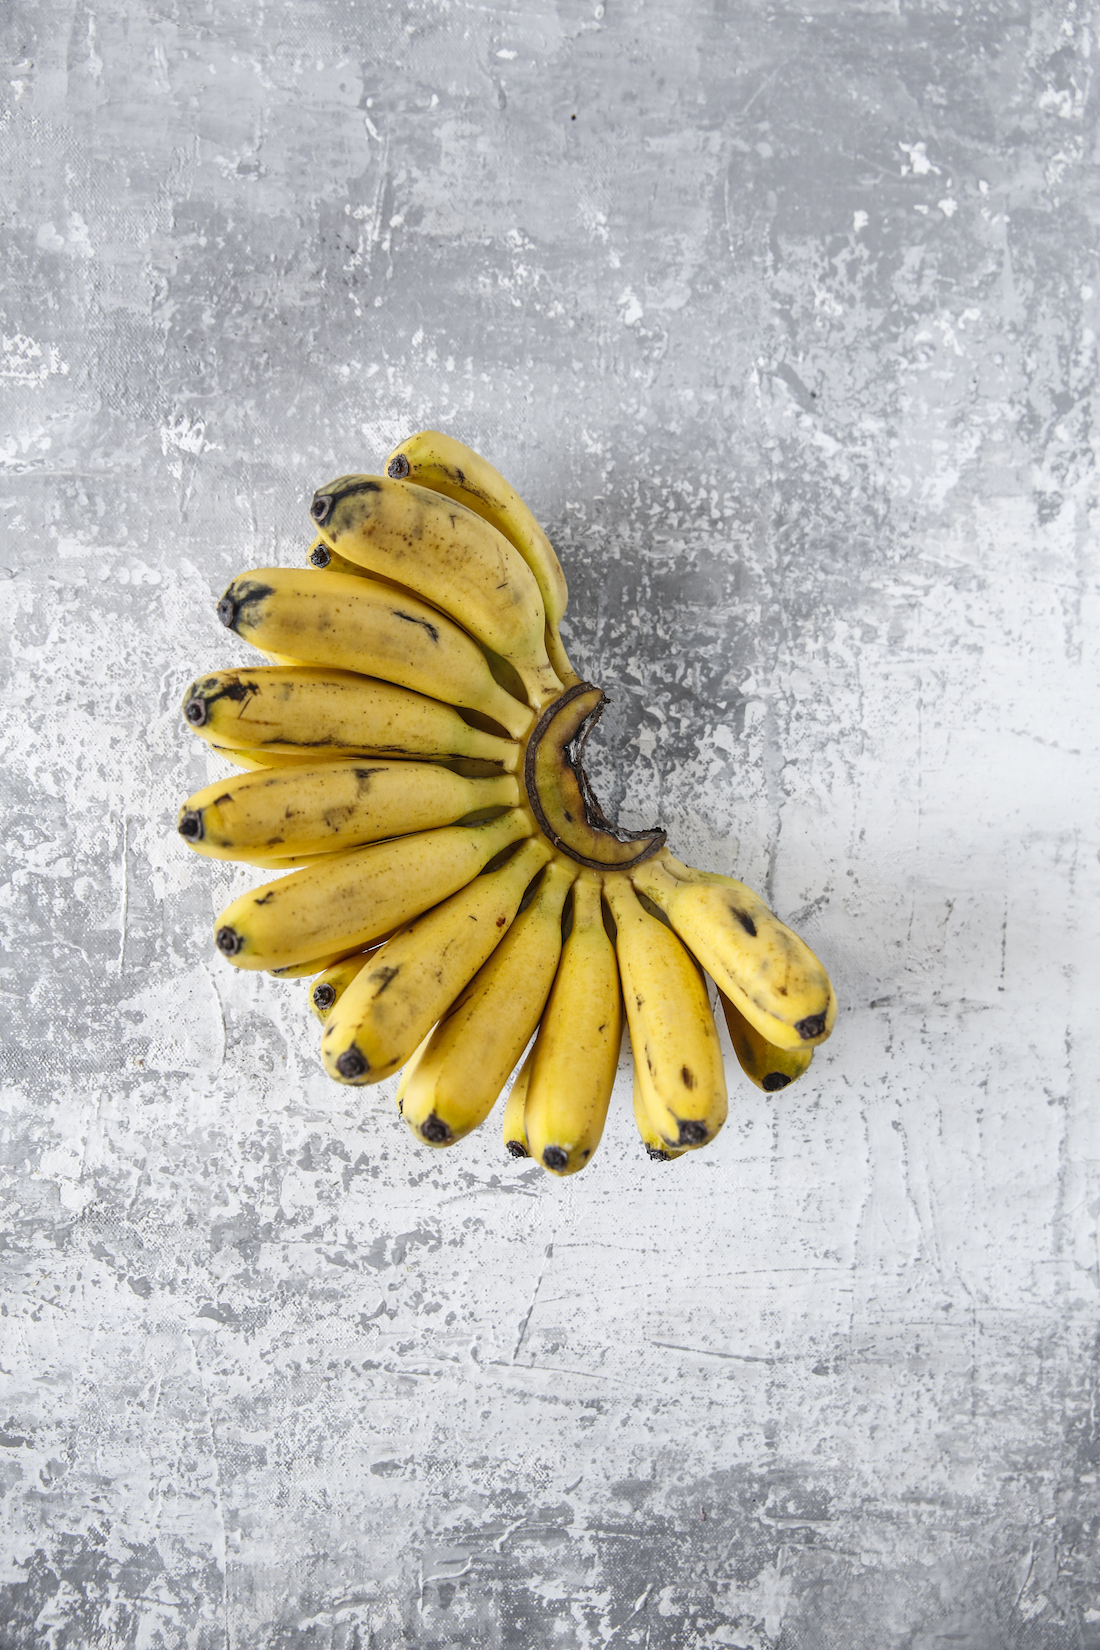 Pre-workout snack, when you're fading away at 3pm, or when you have a sugar craving ... reach for a bananas!  